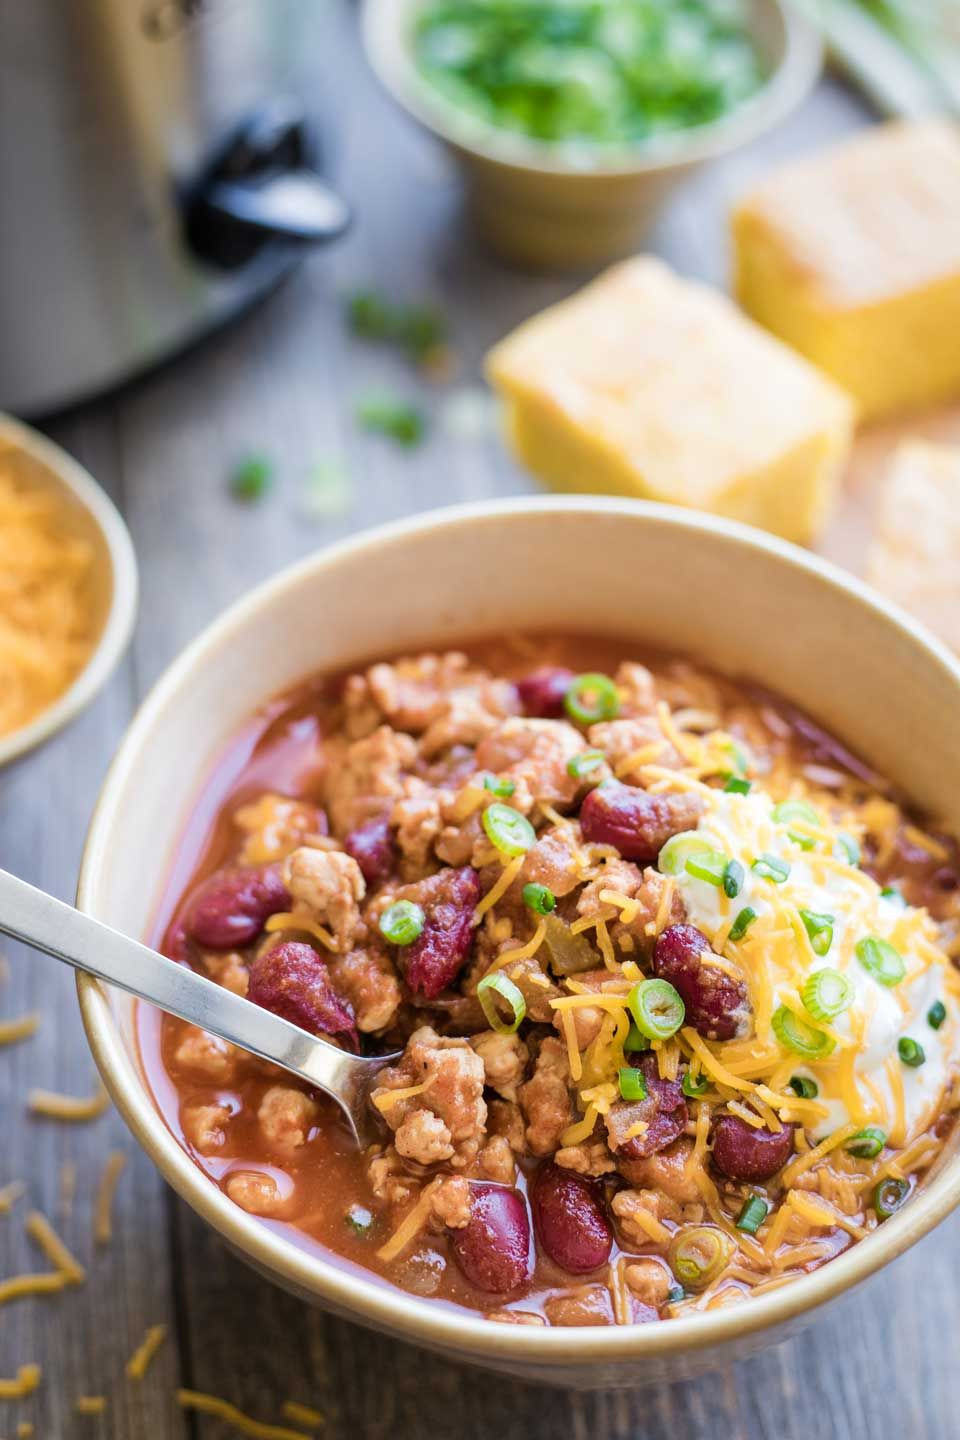 Healthy Turkey Chili Recipe Crock Pot
 An all time favorite This Classic Healthy Crock Pot